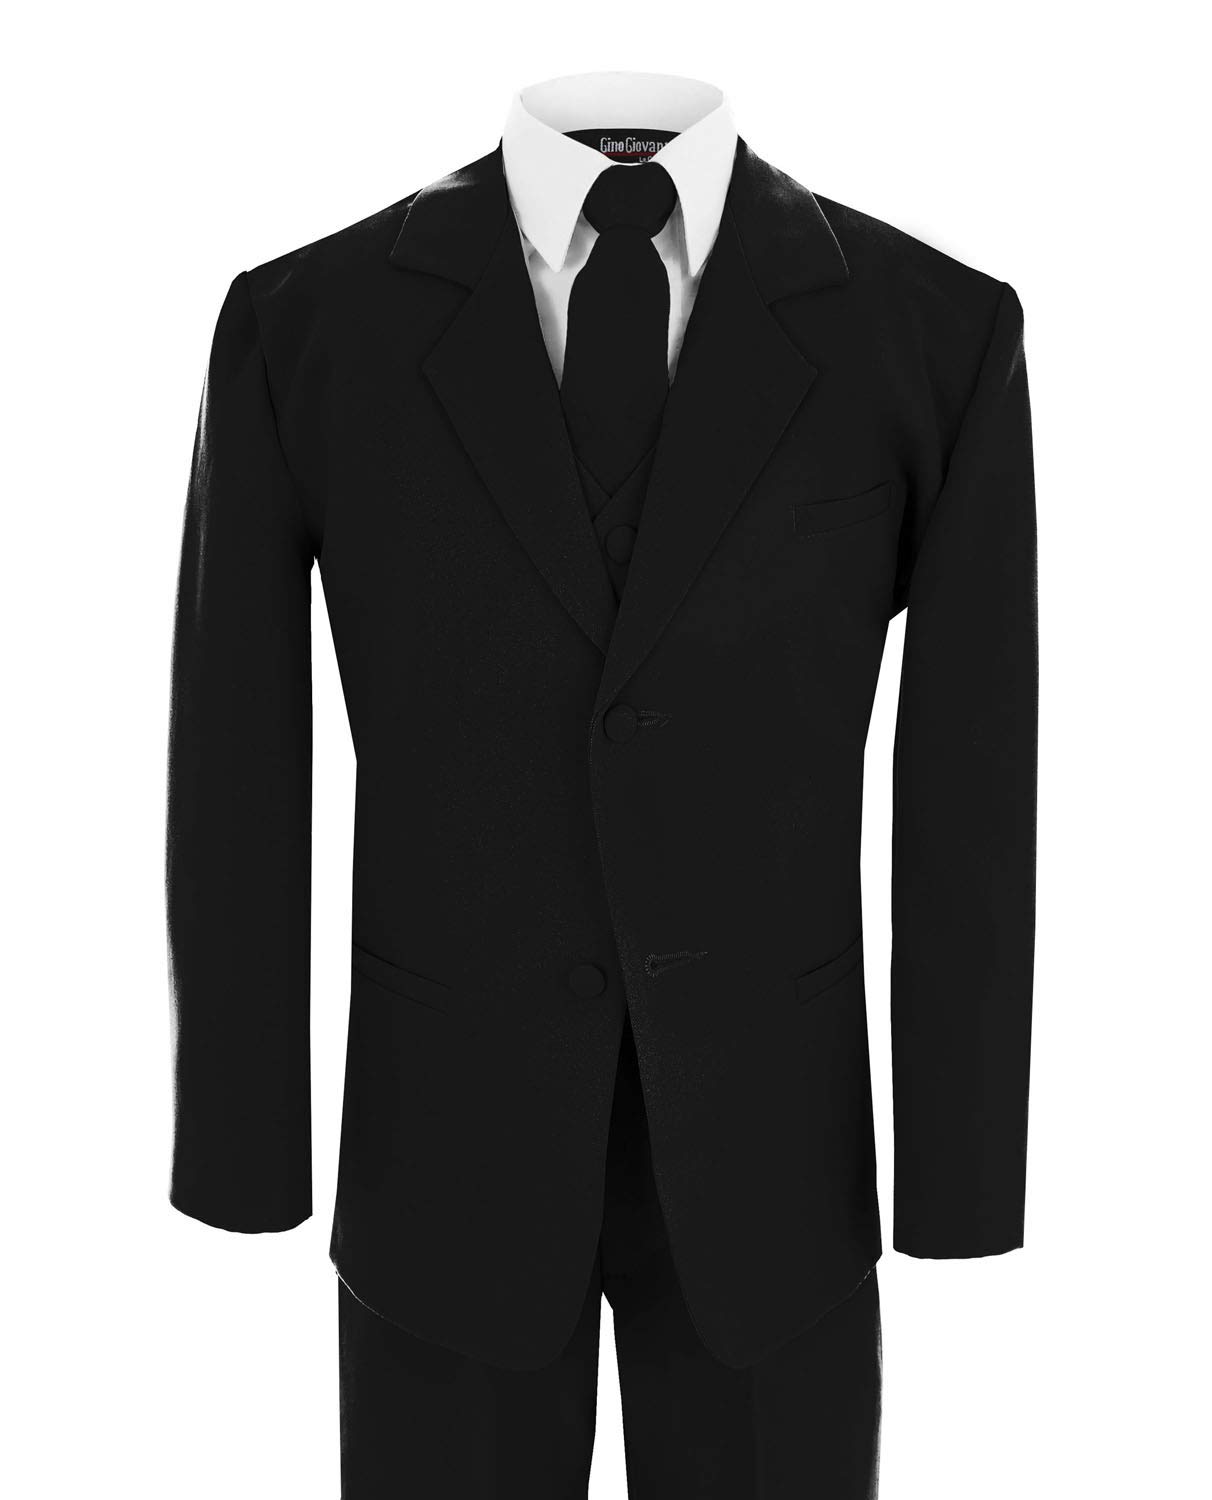 US Fairytailes Formal Boy Suit from Baby to Teen